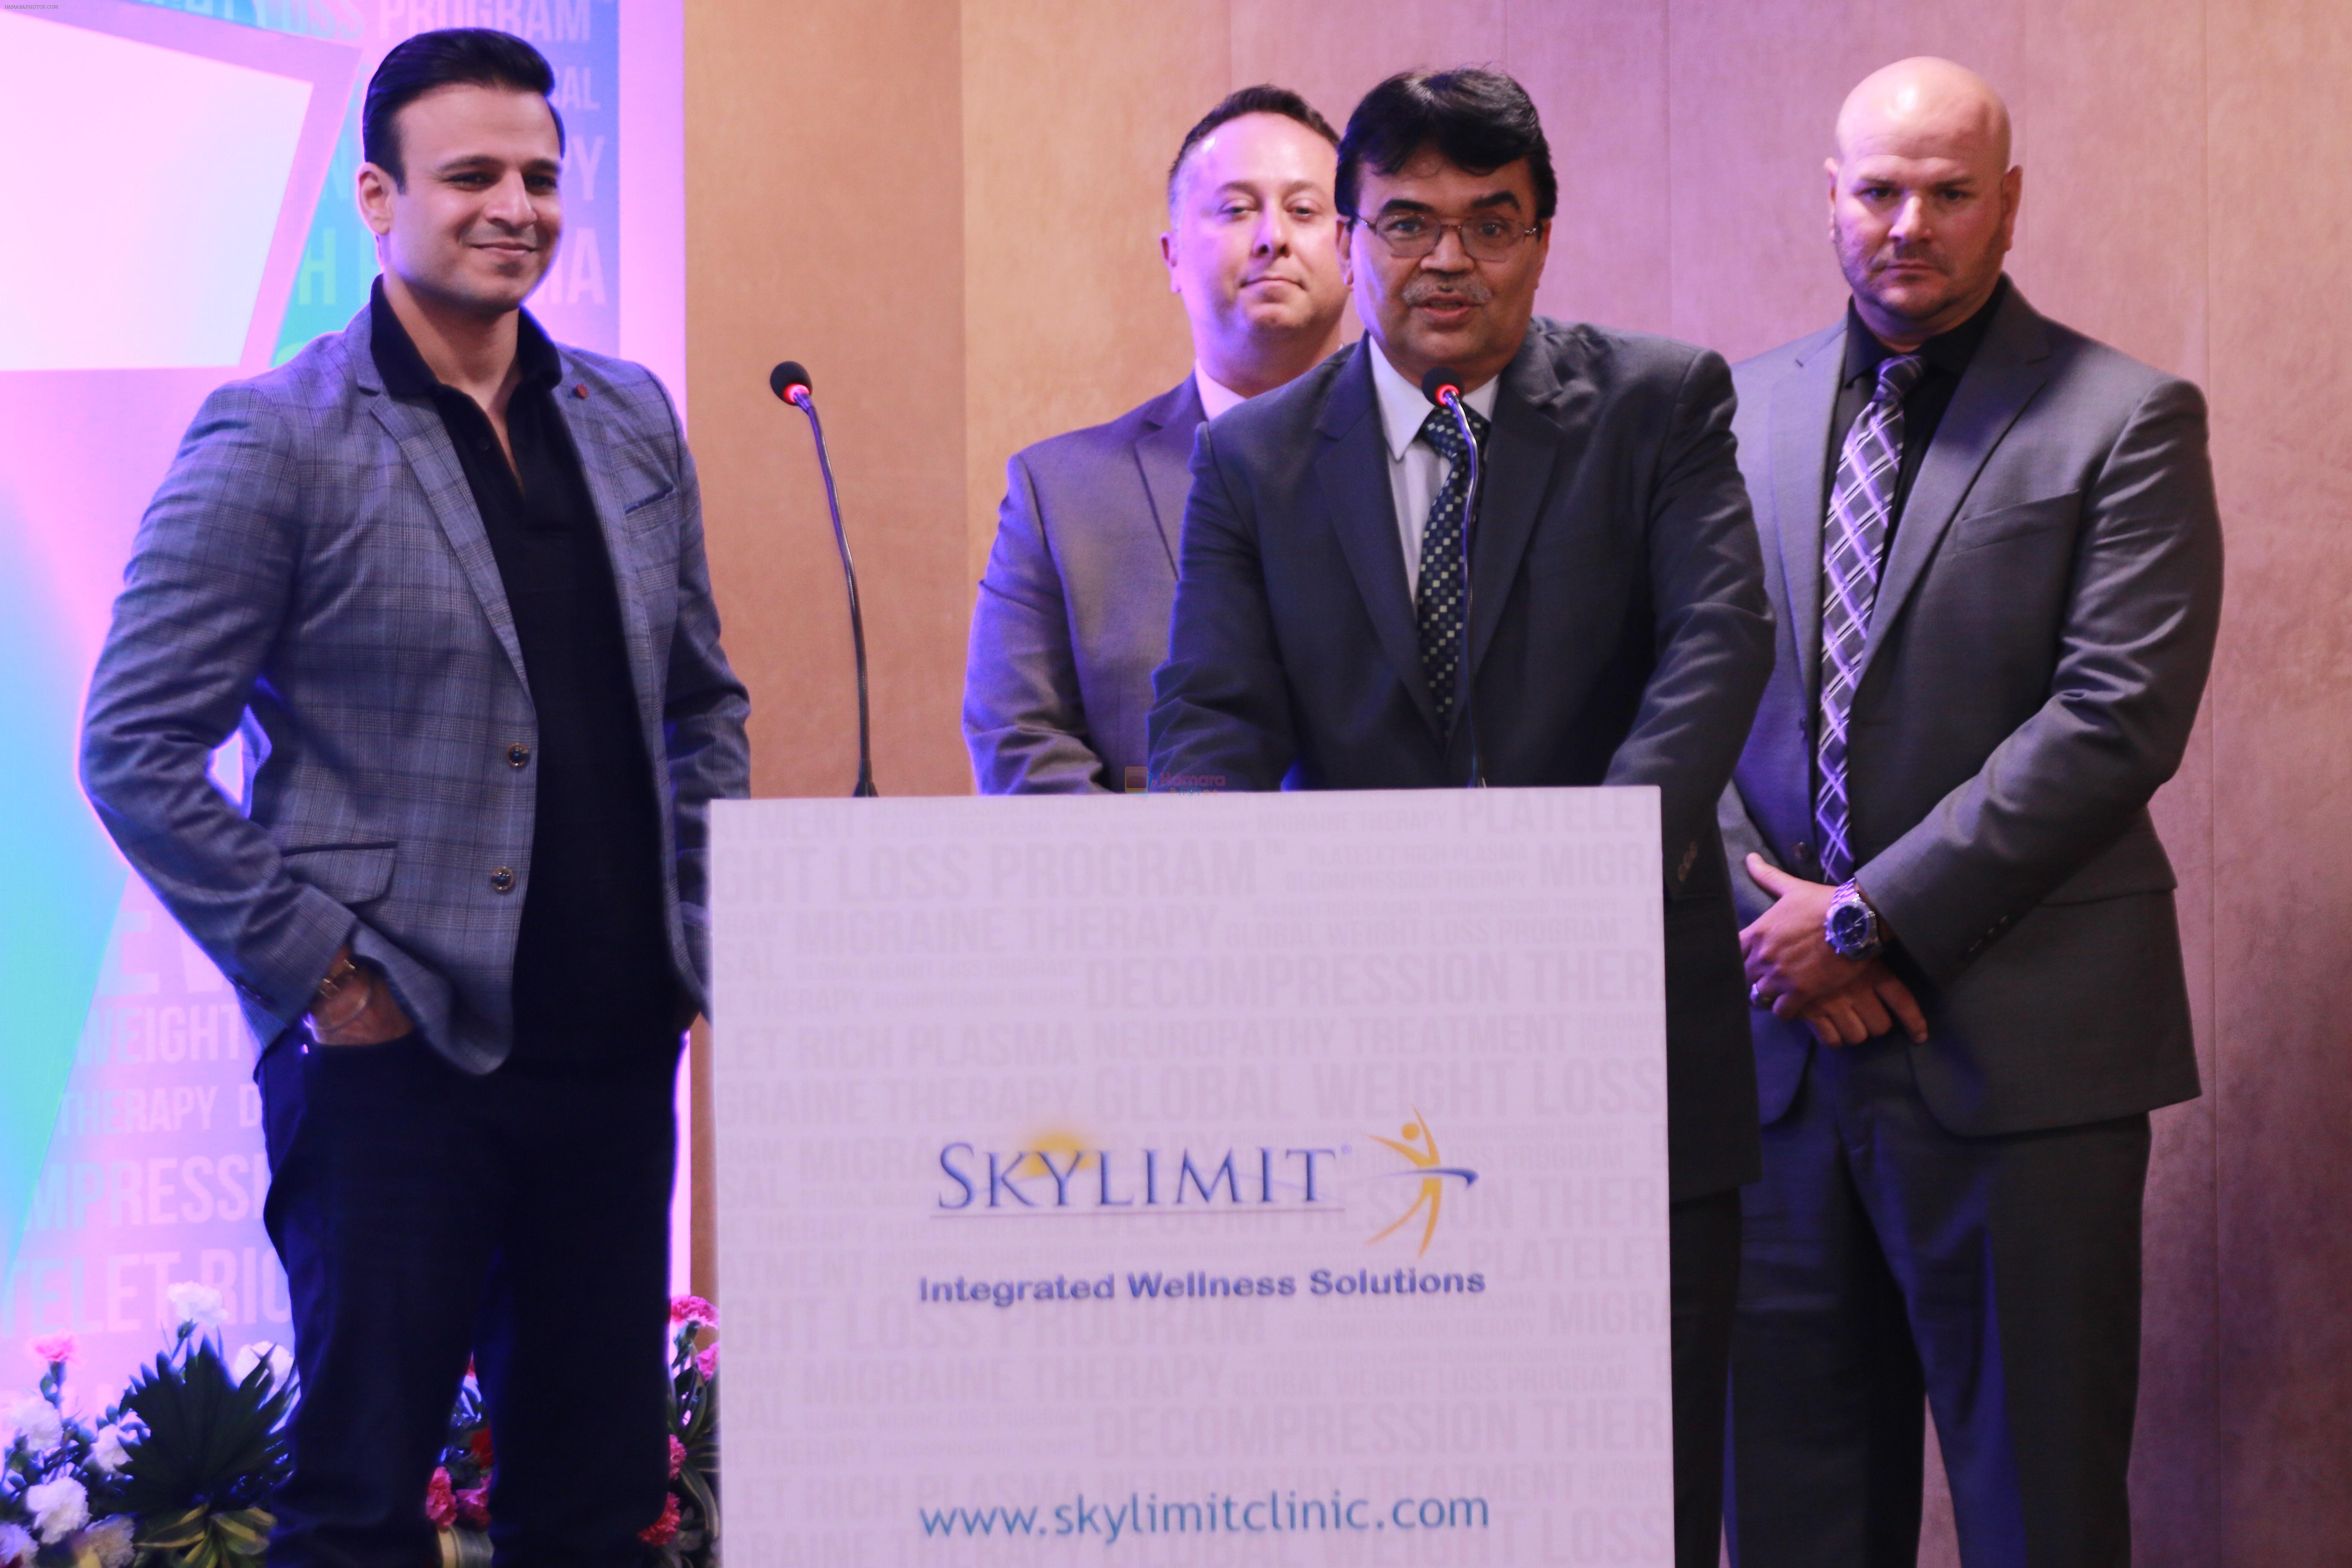 Vivek Oberoi at the inauguration of Skylimit's flagship wellness center in World Trade Center, Mumbai on 5th Aug 2017